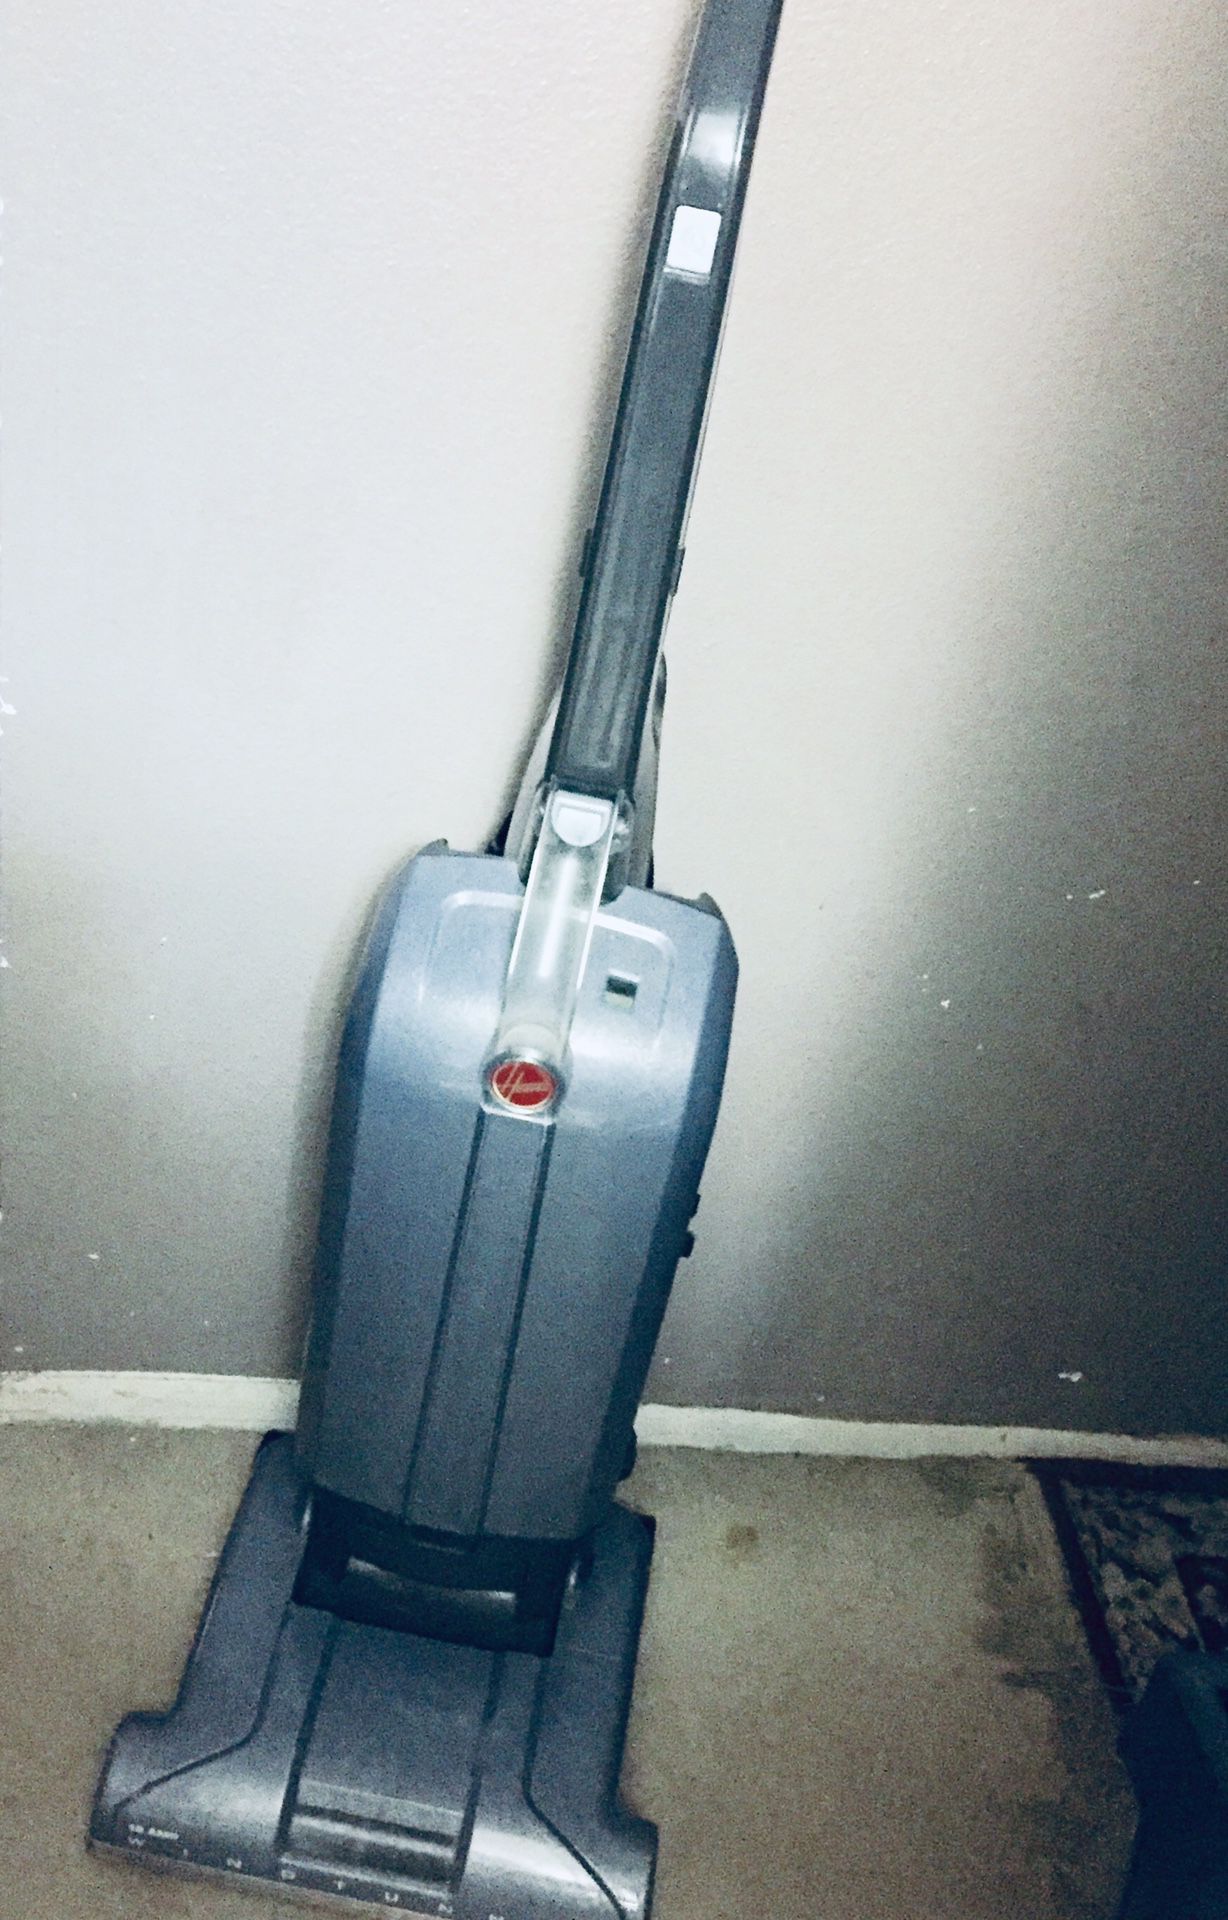 HOOVER WIND-TUNNEL/ 12 AMP/ UPRIGHT VACUUM CLEANER/ WORKS GREAT